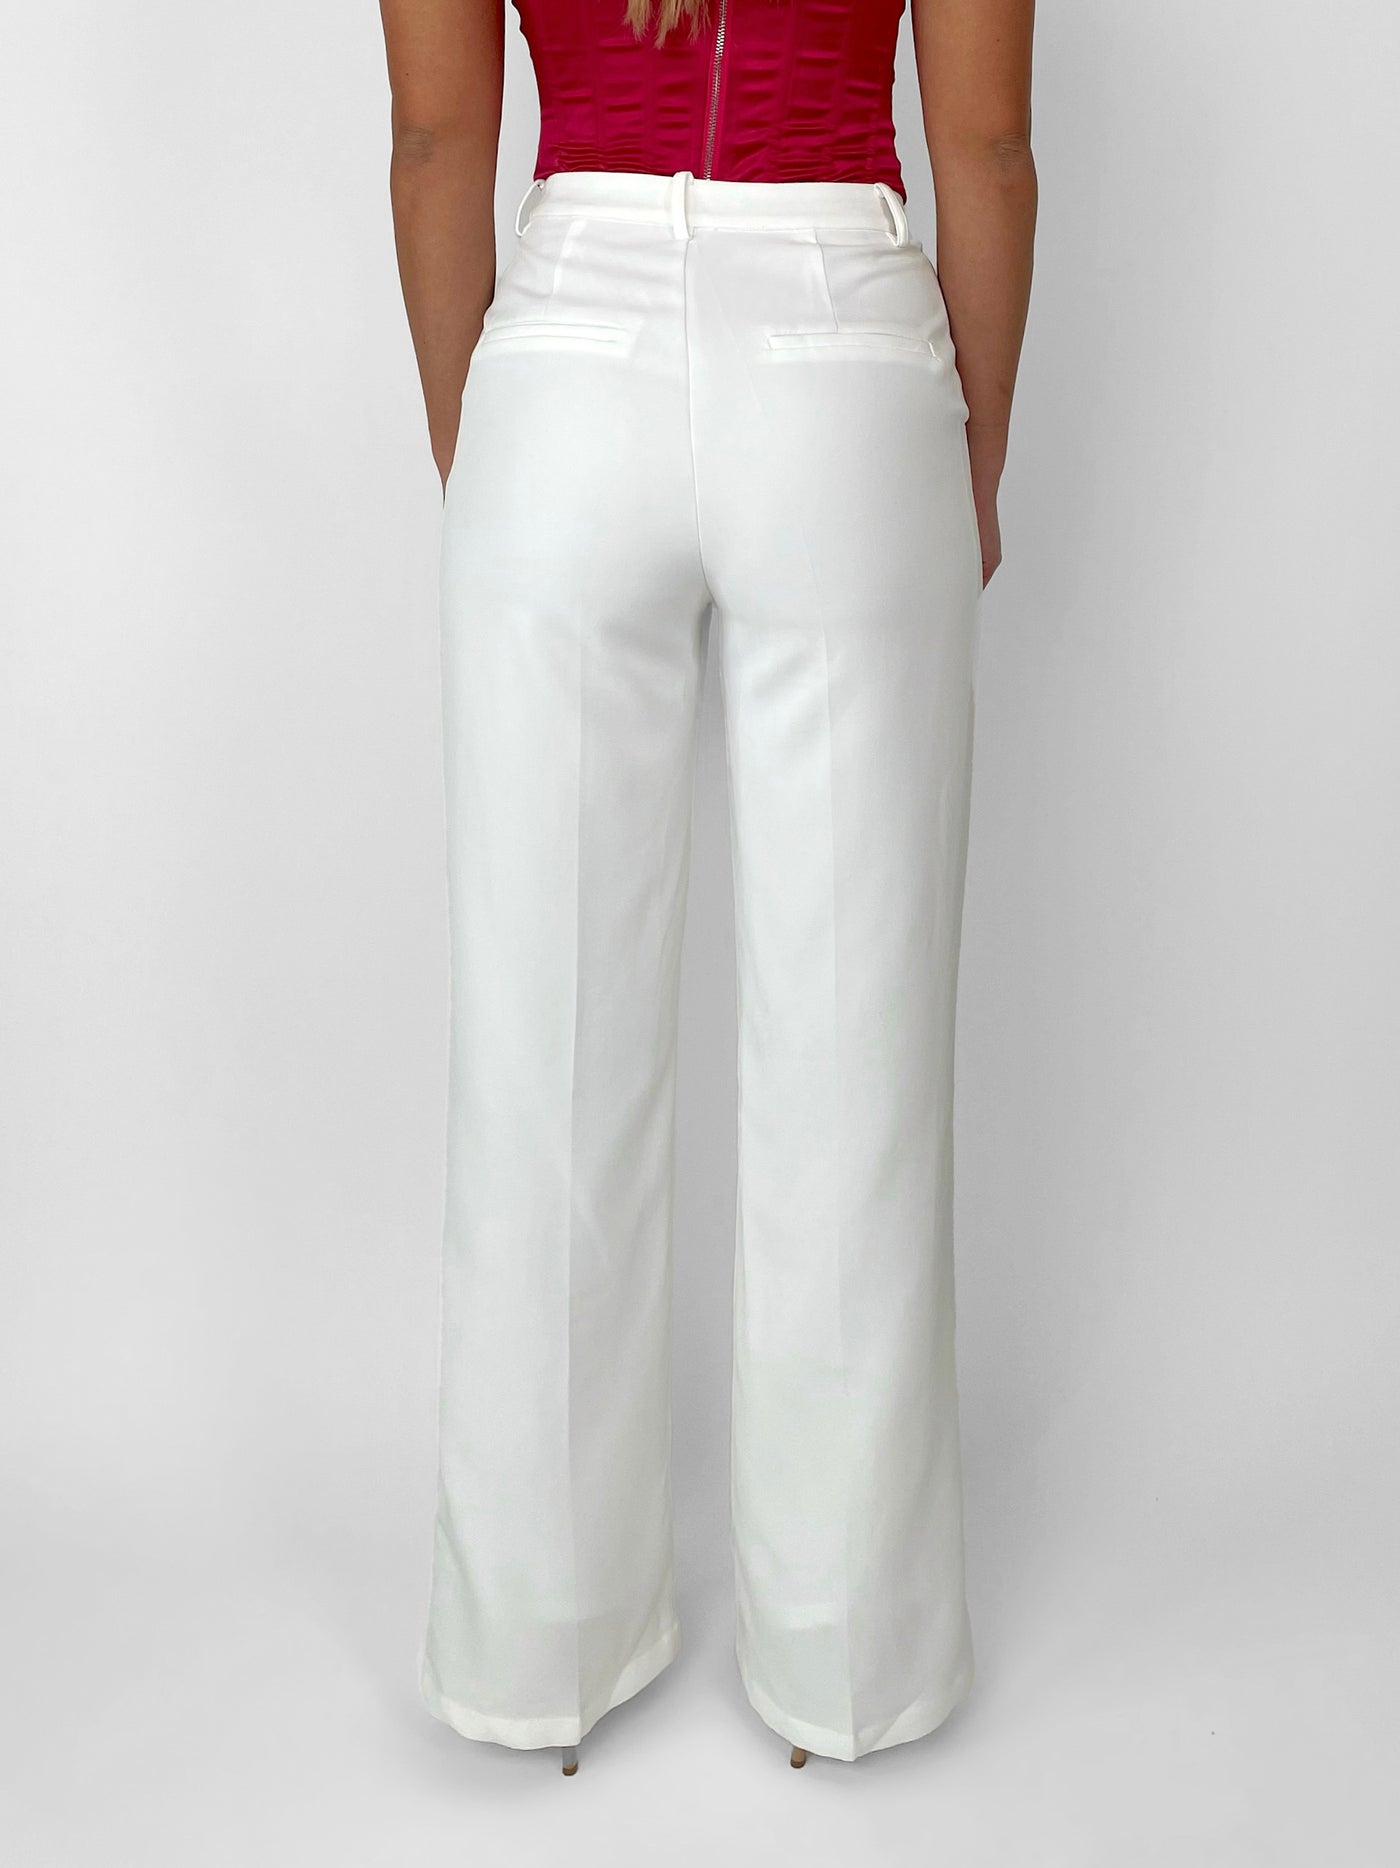 Next Level Trousers // White